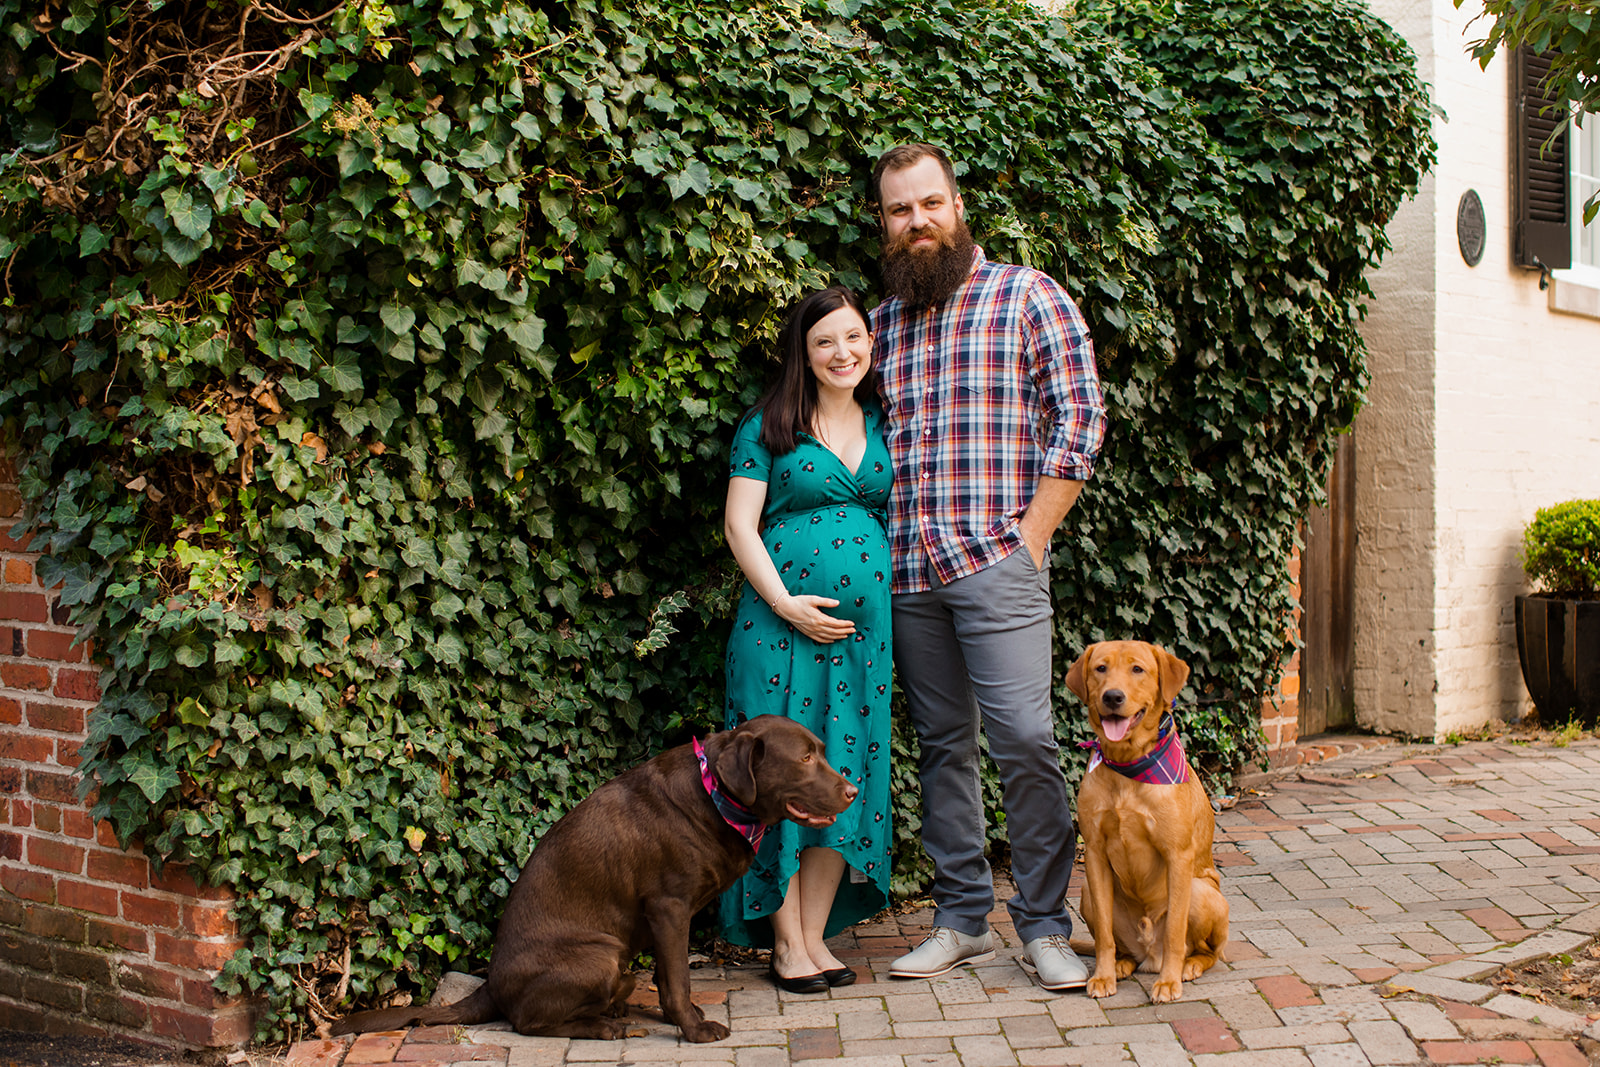 Old Town Alexandria Virginia Maternity Photo Shoot with Dogs - Image Property of www.j-dphoto.com